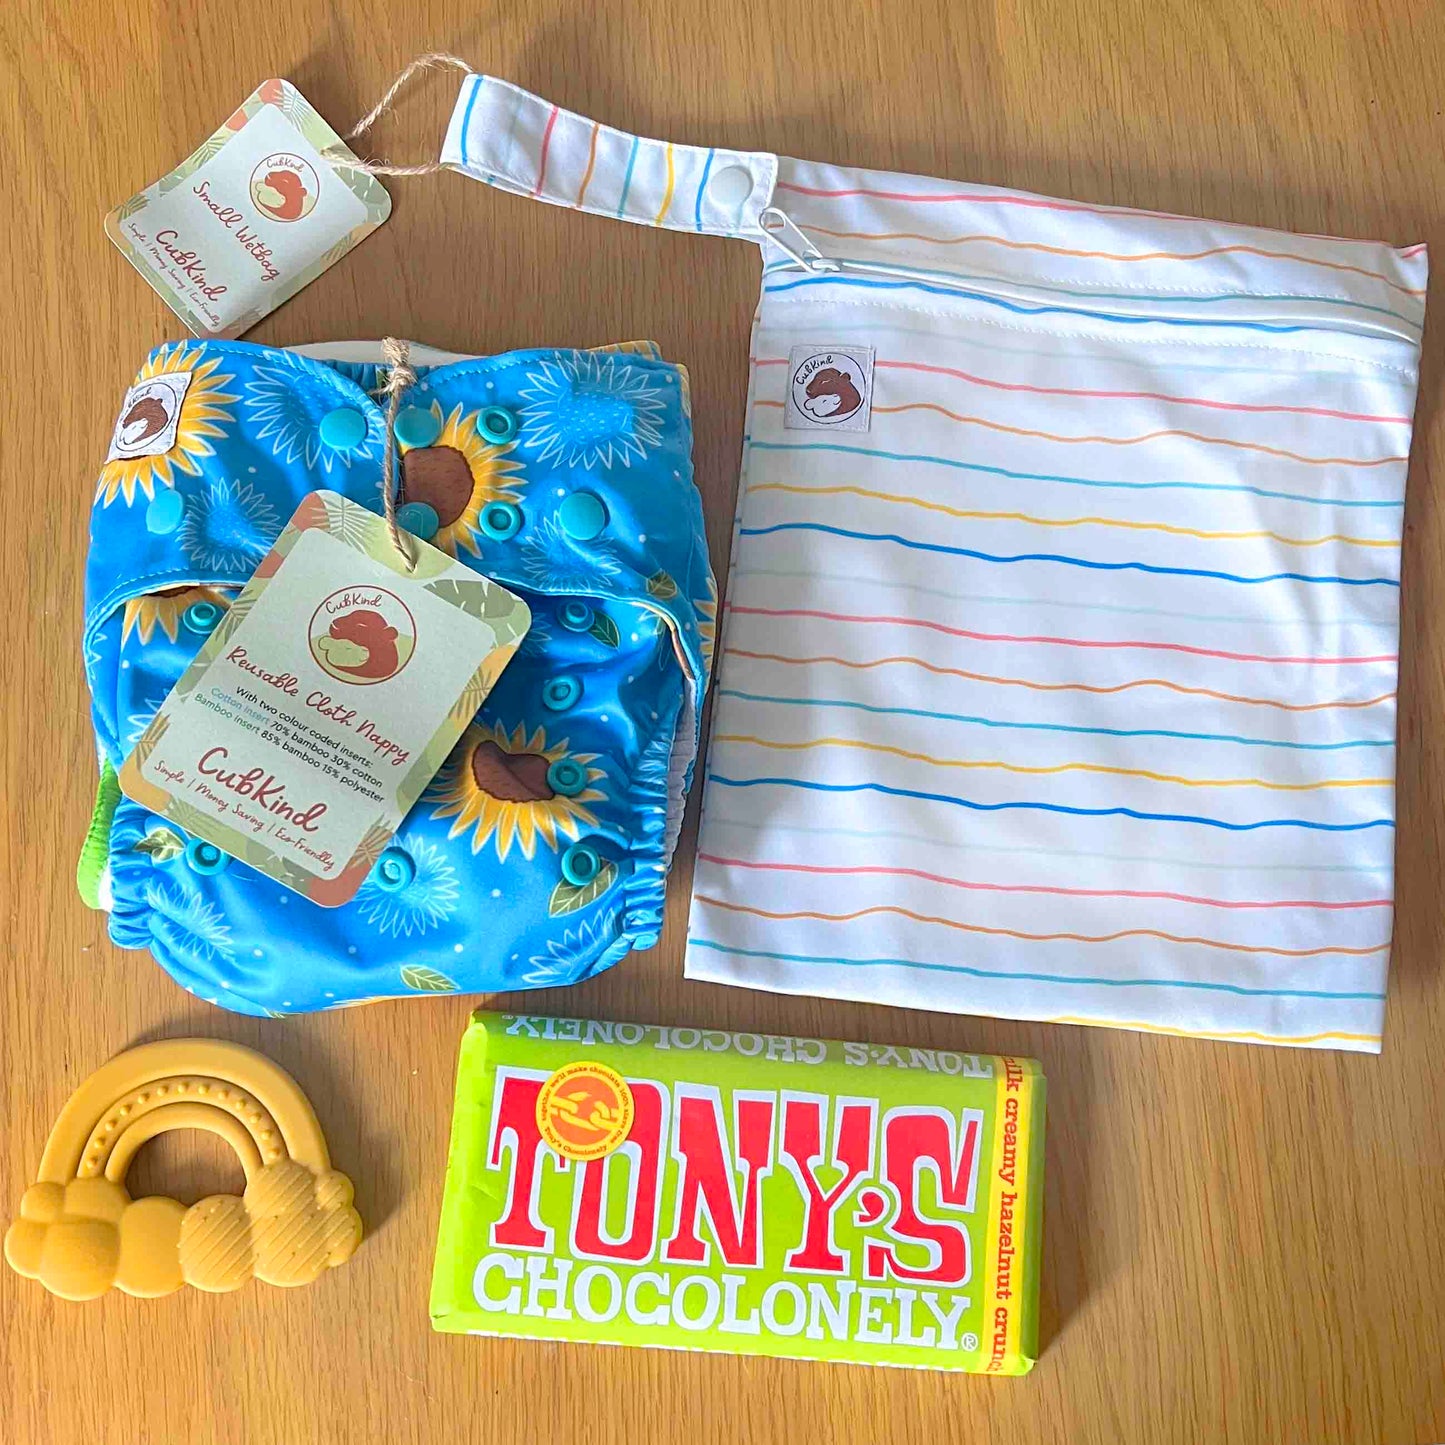 A reusable nappy, wetbag, teether and chocolate